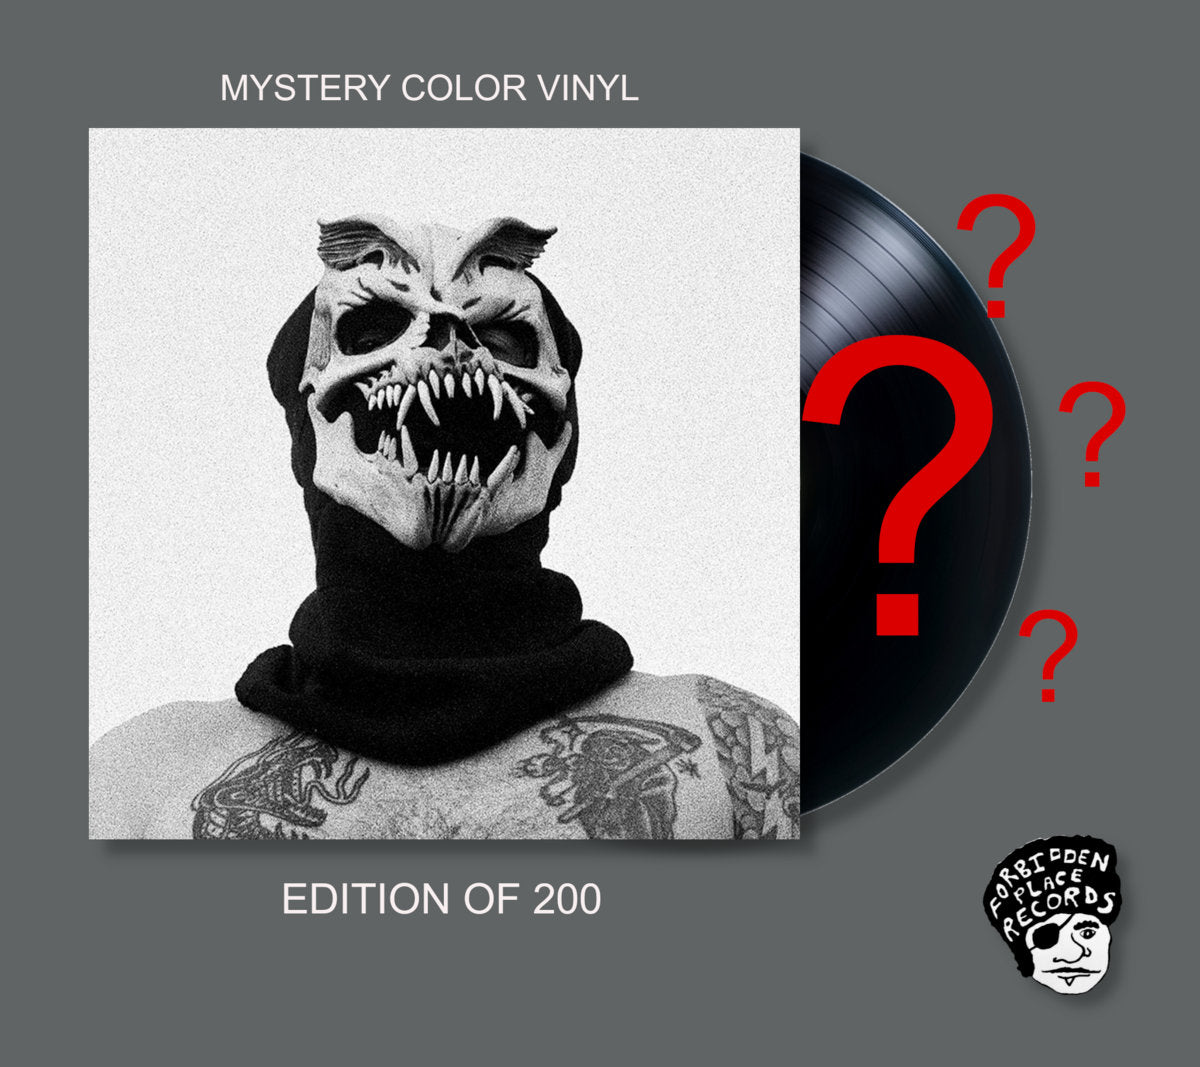 Charley No Face - "Eleven Thousand Volts" Mystery Vinyl LP